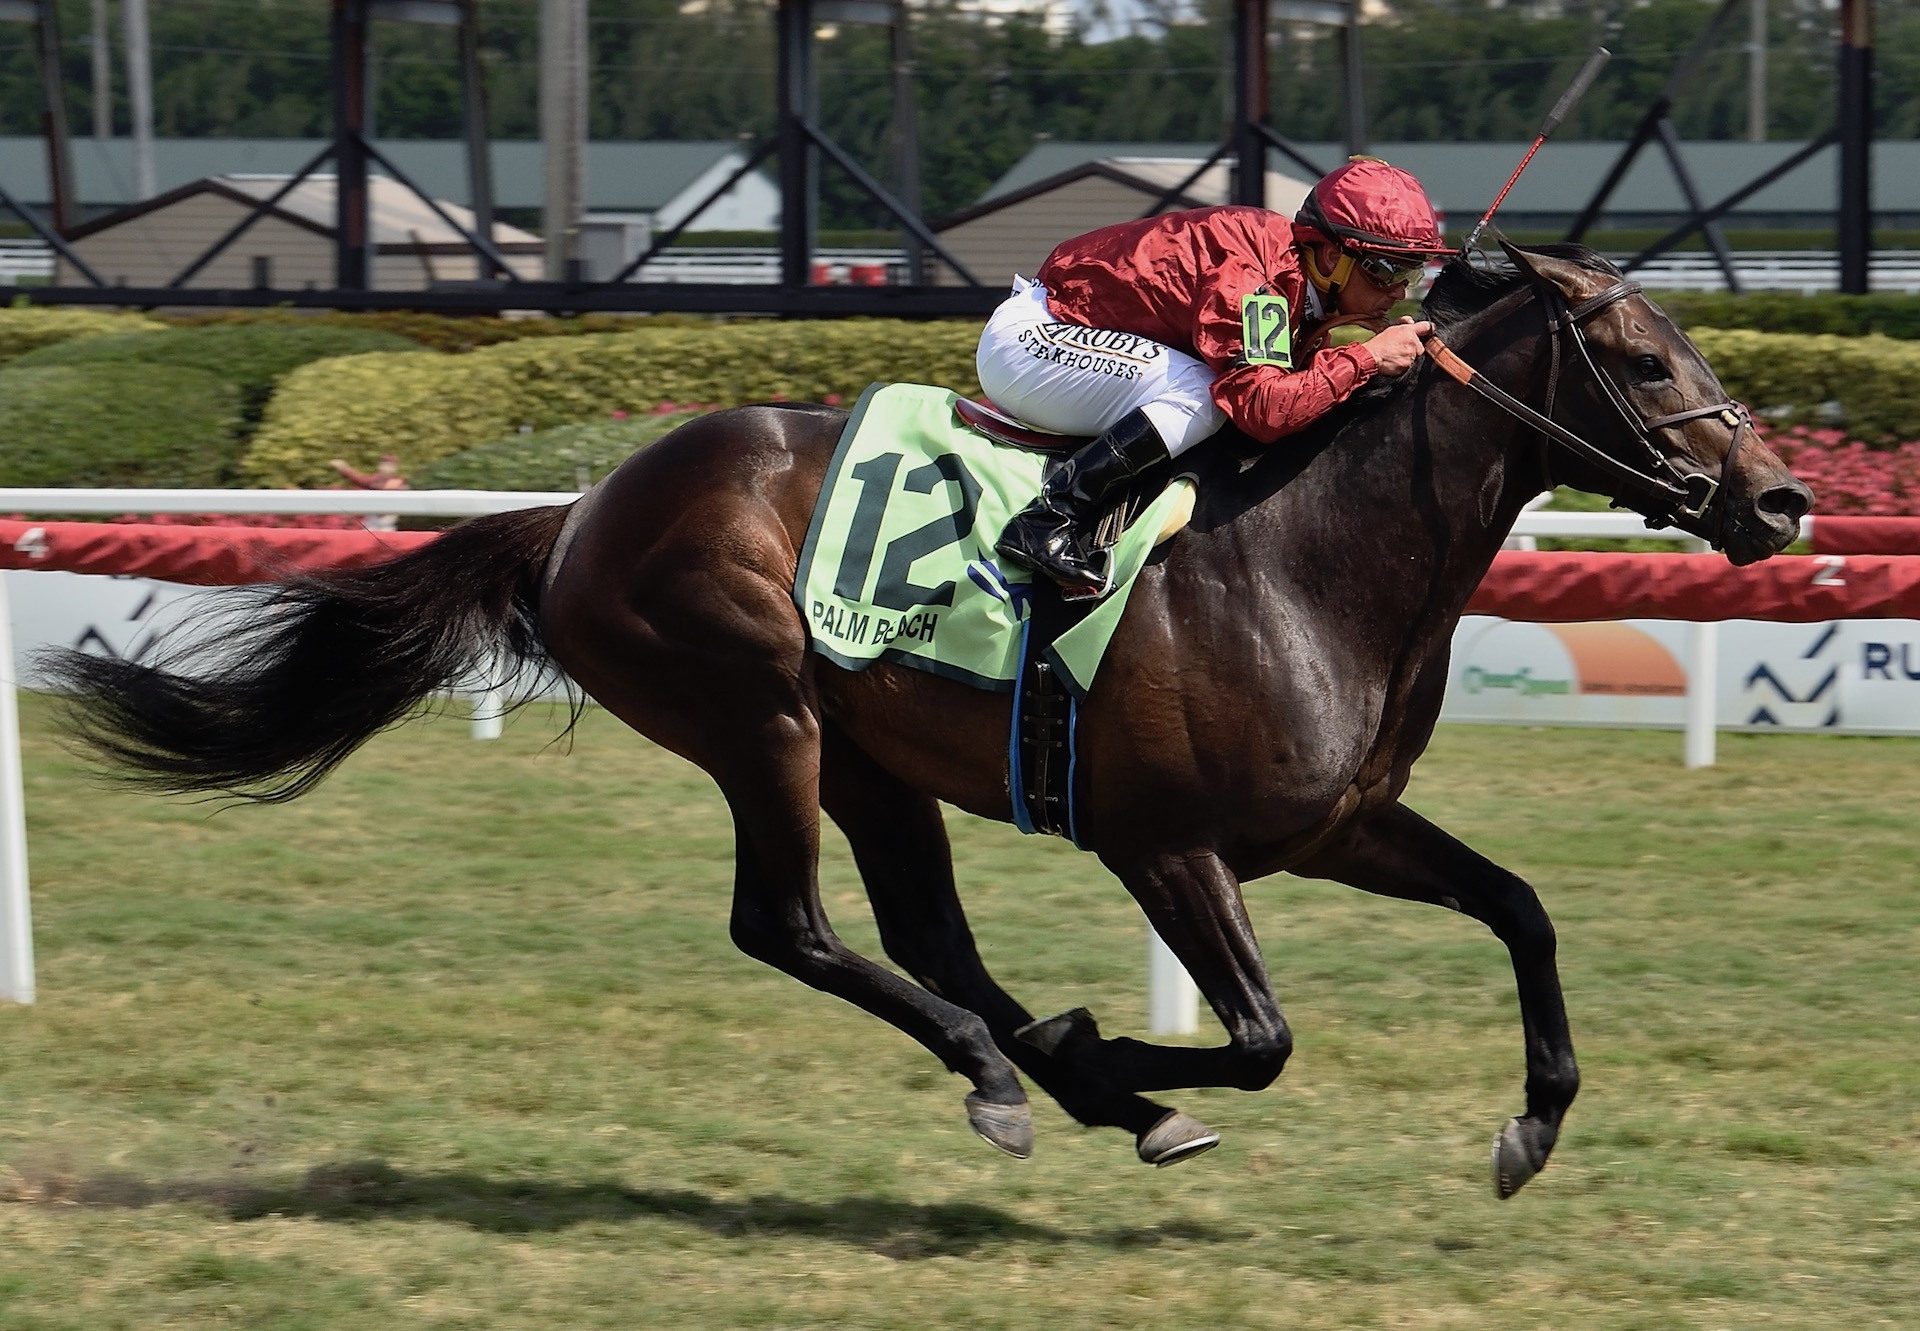 Vitalogy (No Nay Never) winning the Gr.3 Palm Beach Stakes at Gulfstream Park